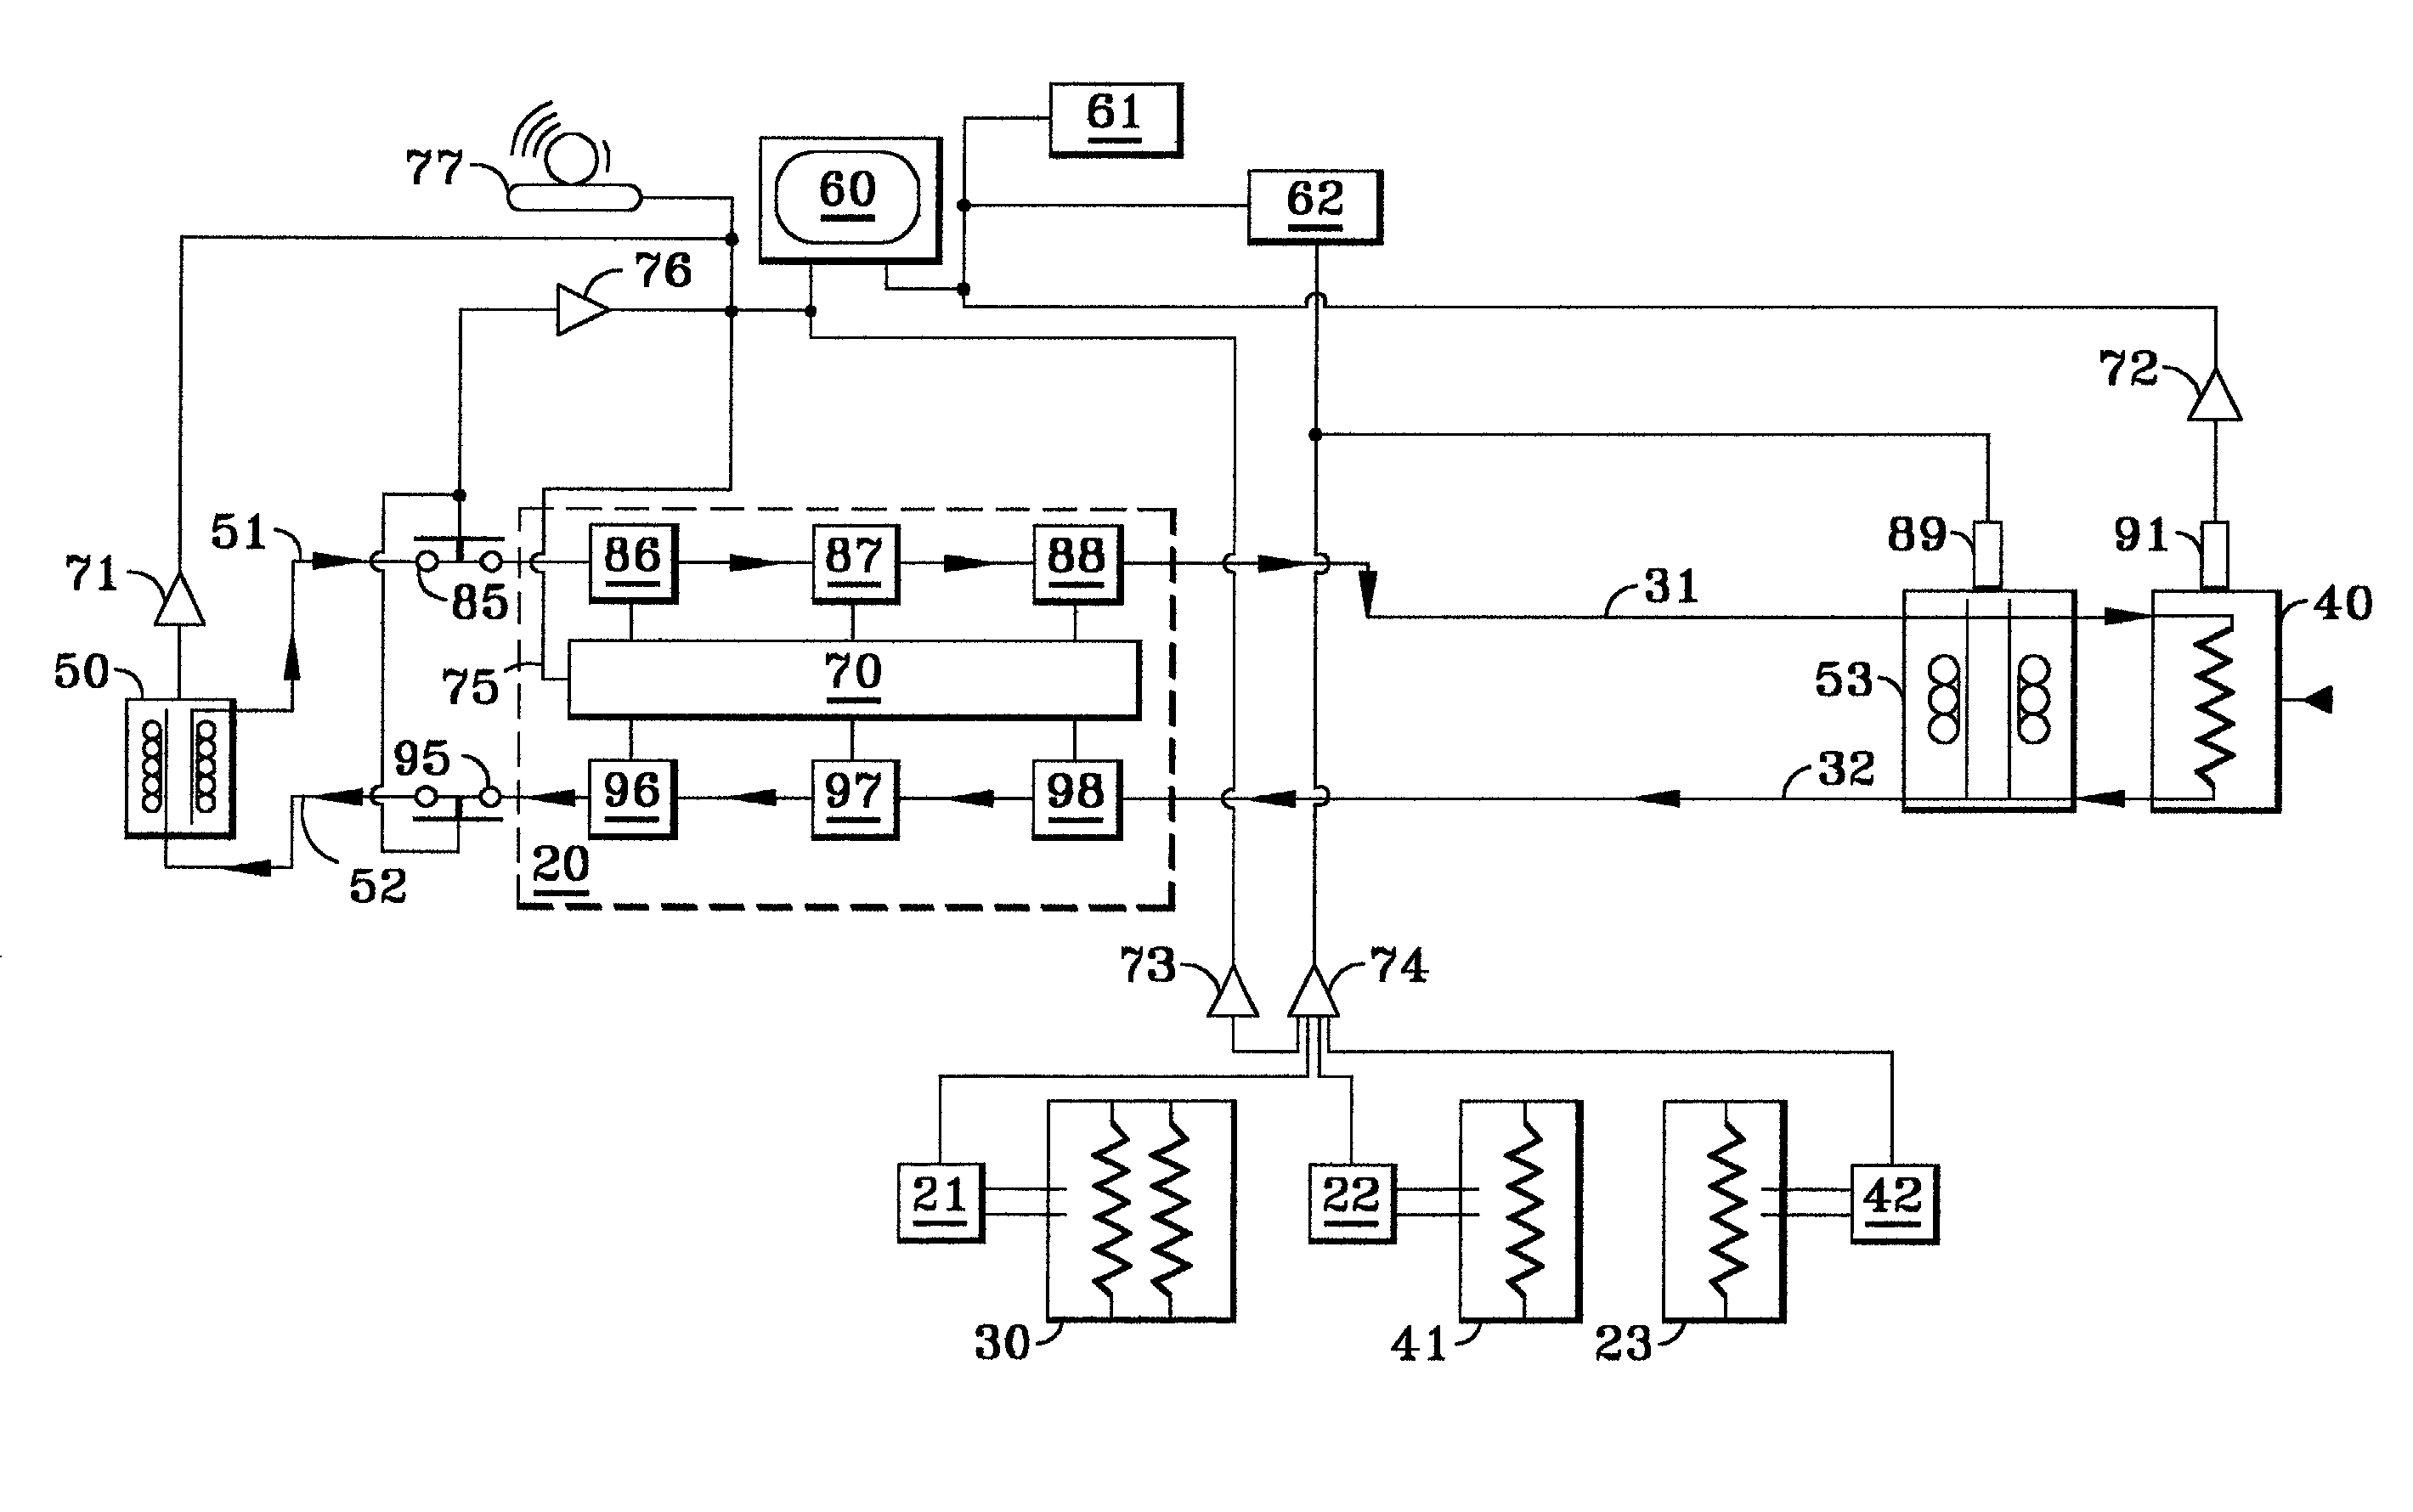 Apparatus and methods for monitoring and testing coolant recirculation systems